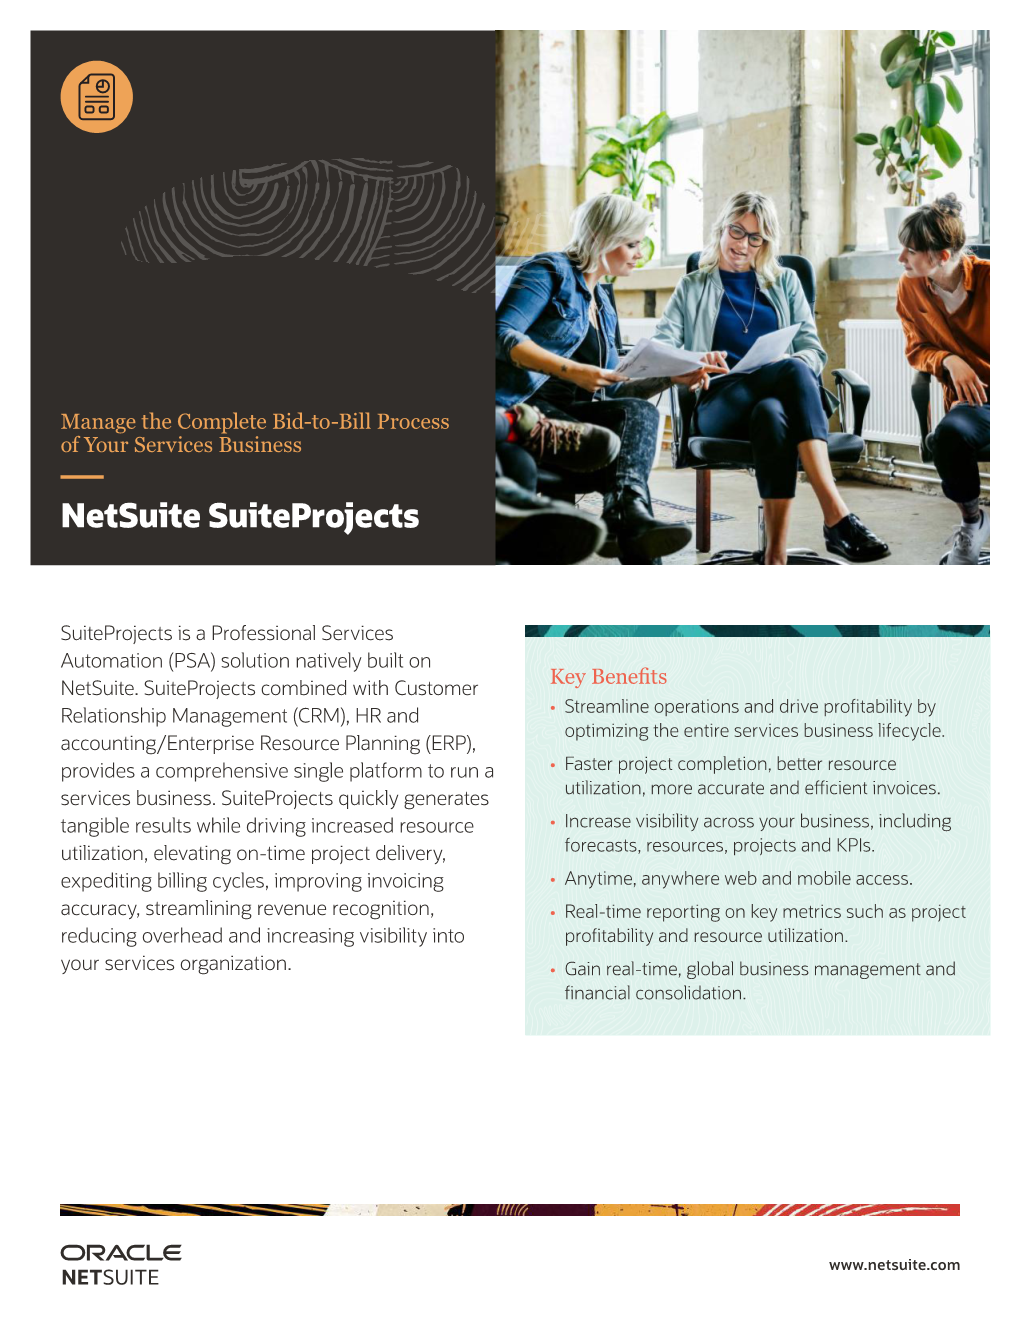 Download Netsuite Suiteprojects Data Sheet